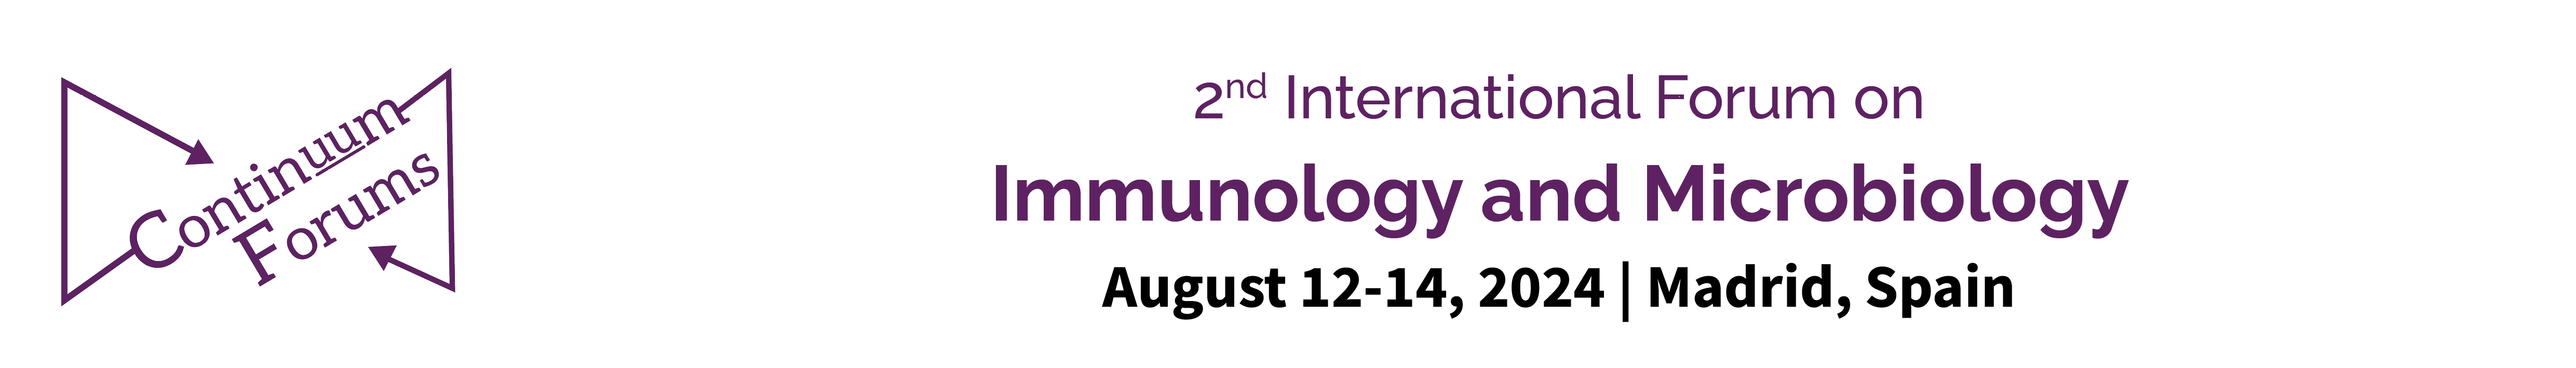 International Forum on Immunology and Microbiology 